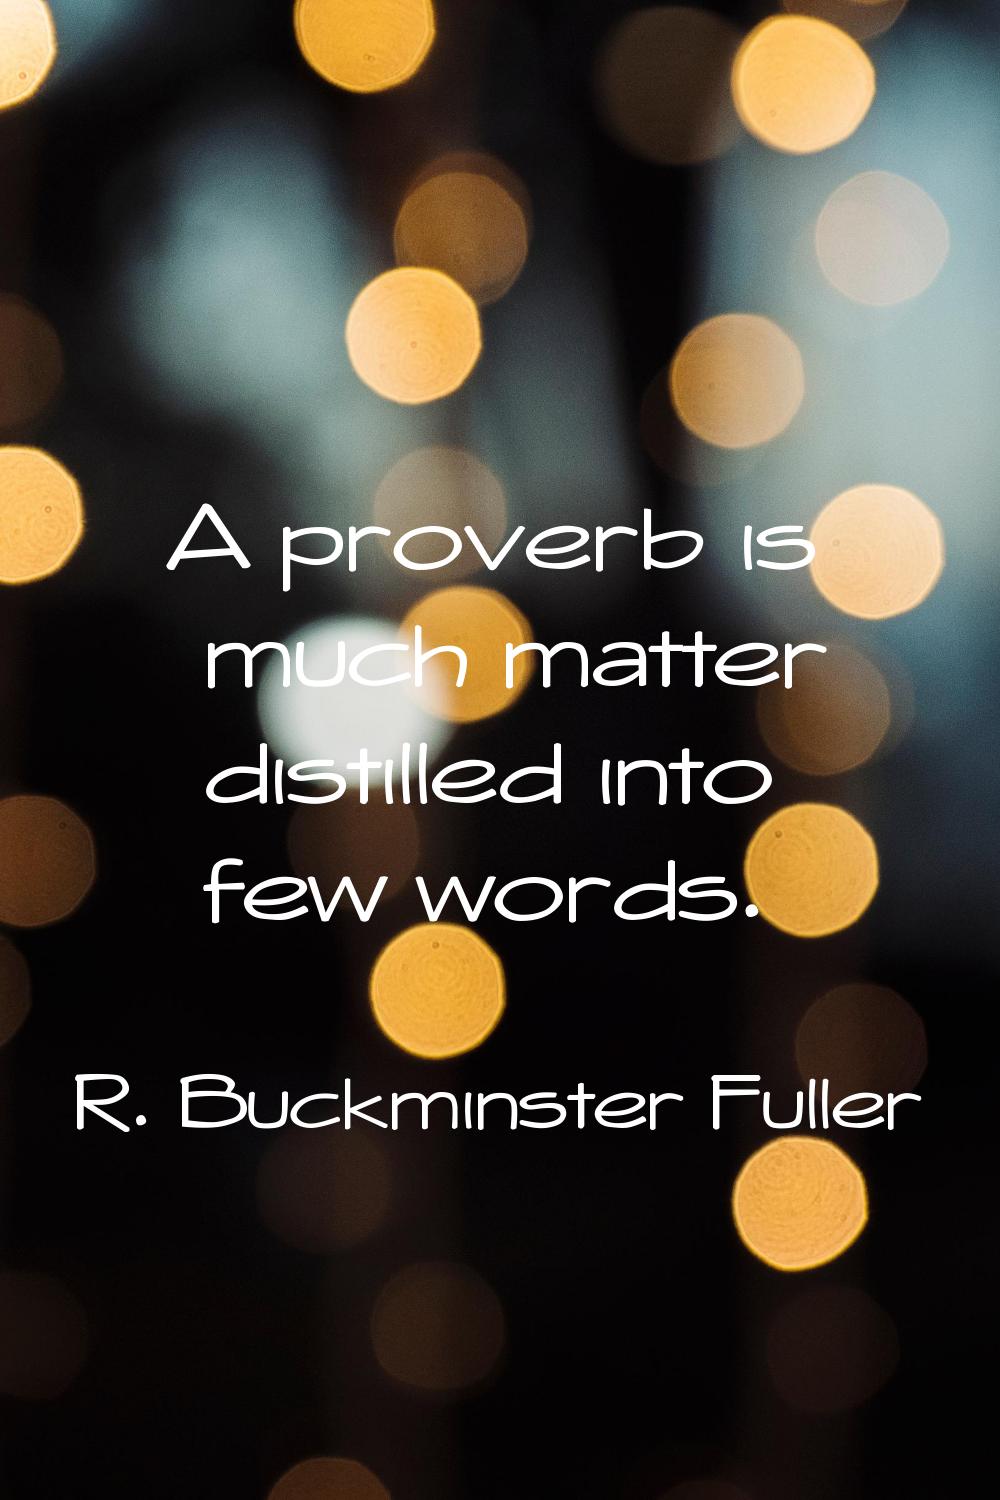 A proverb is much matter distilled into few words.